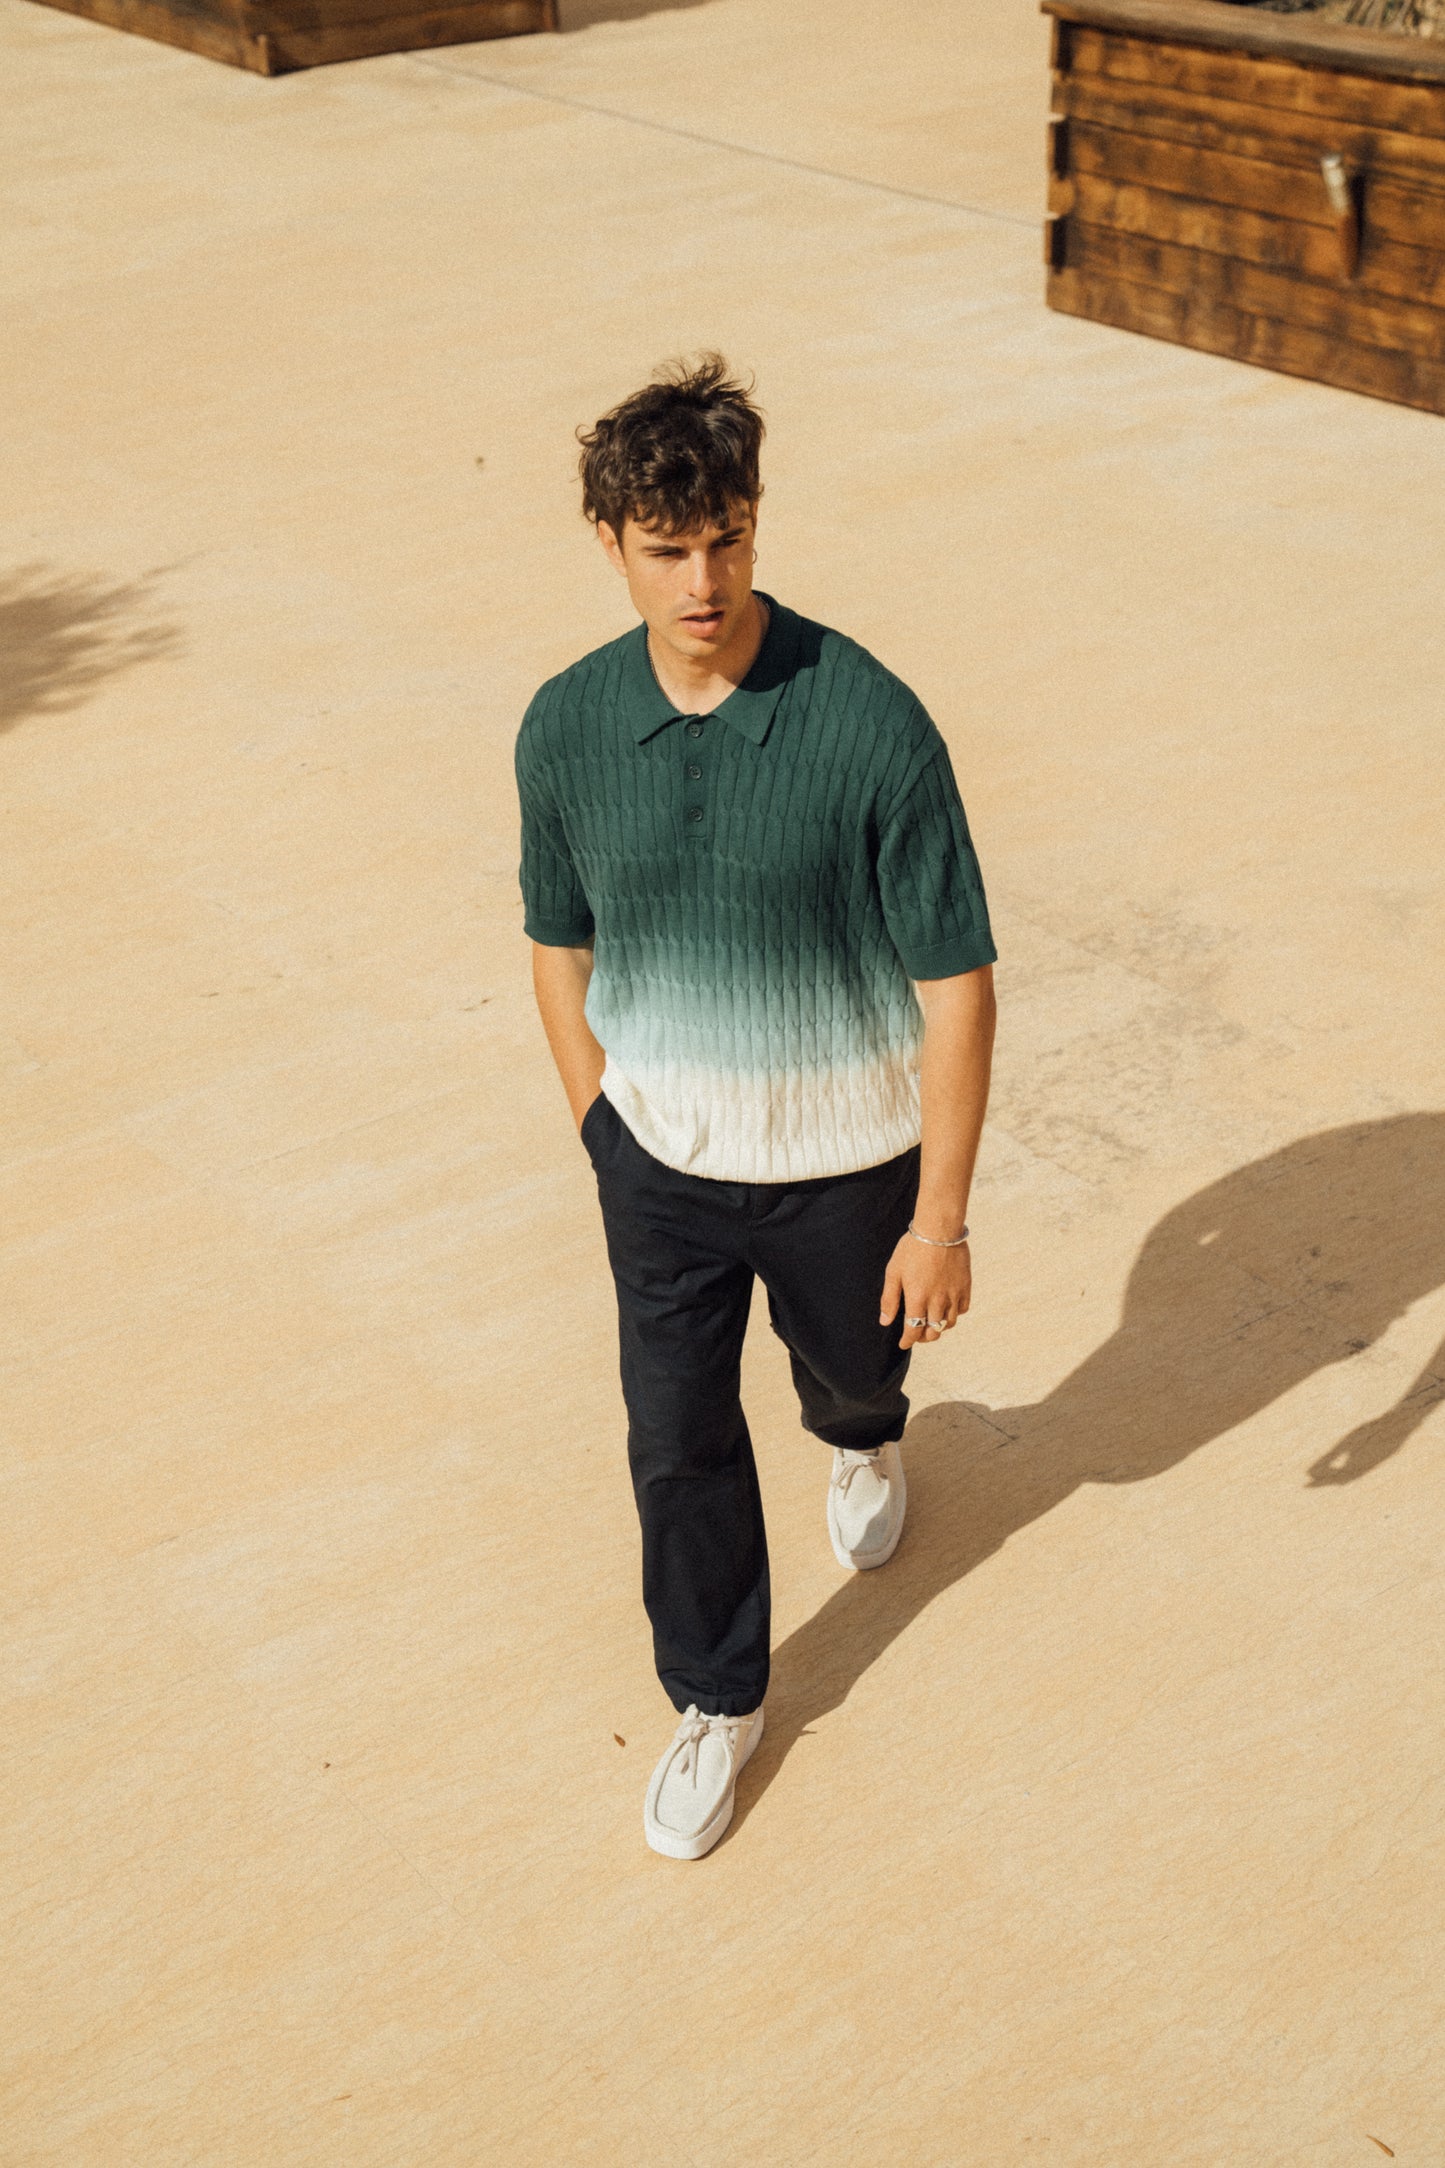 OMBRE CABLE KNIT POLO - FOREST / CREAM